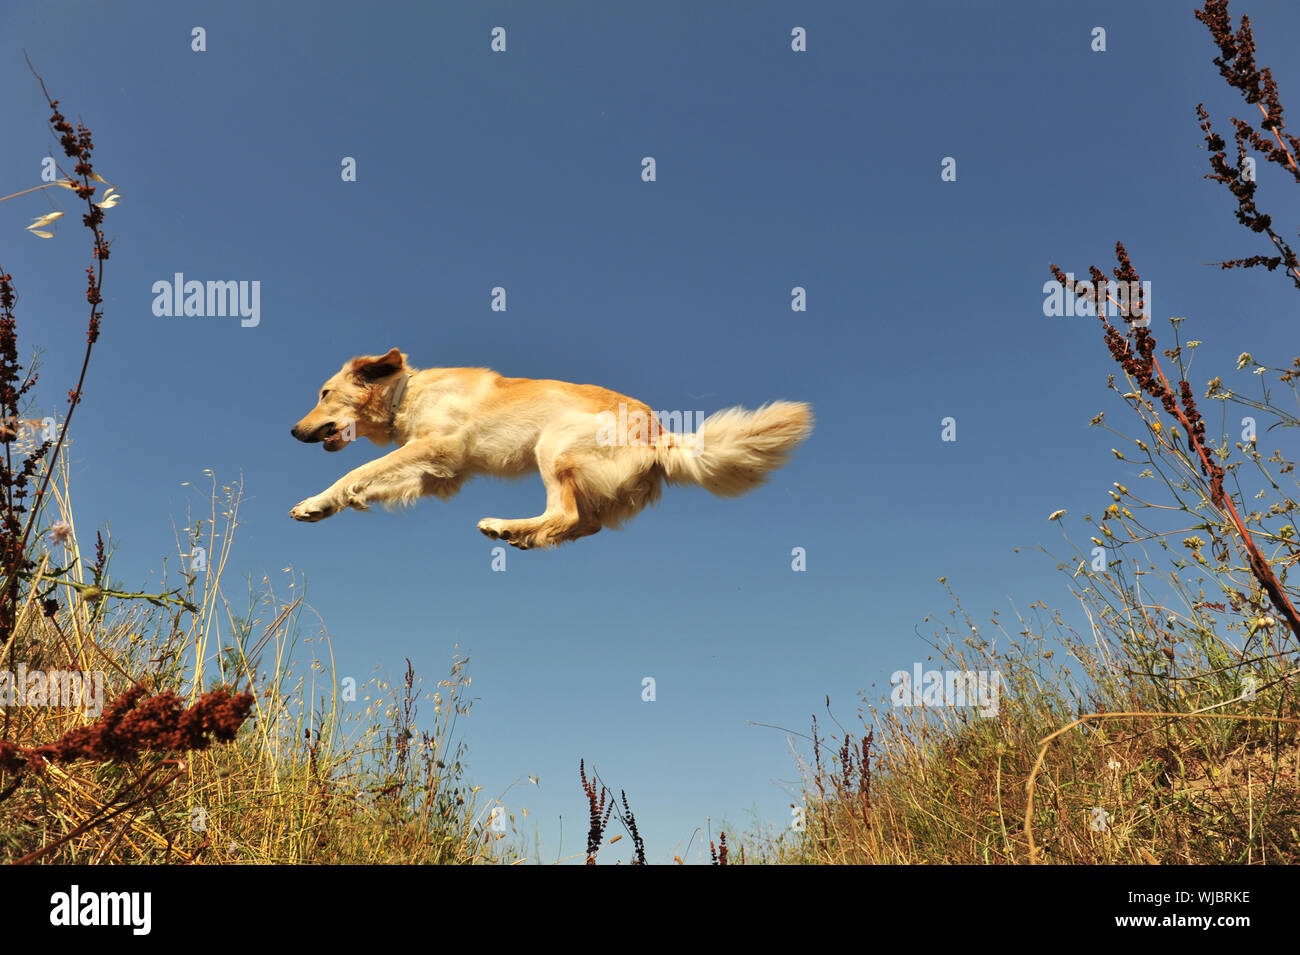 jumping purebred golden retriever or blond hovawart on a blue sky Stock Photo